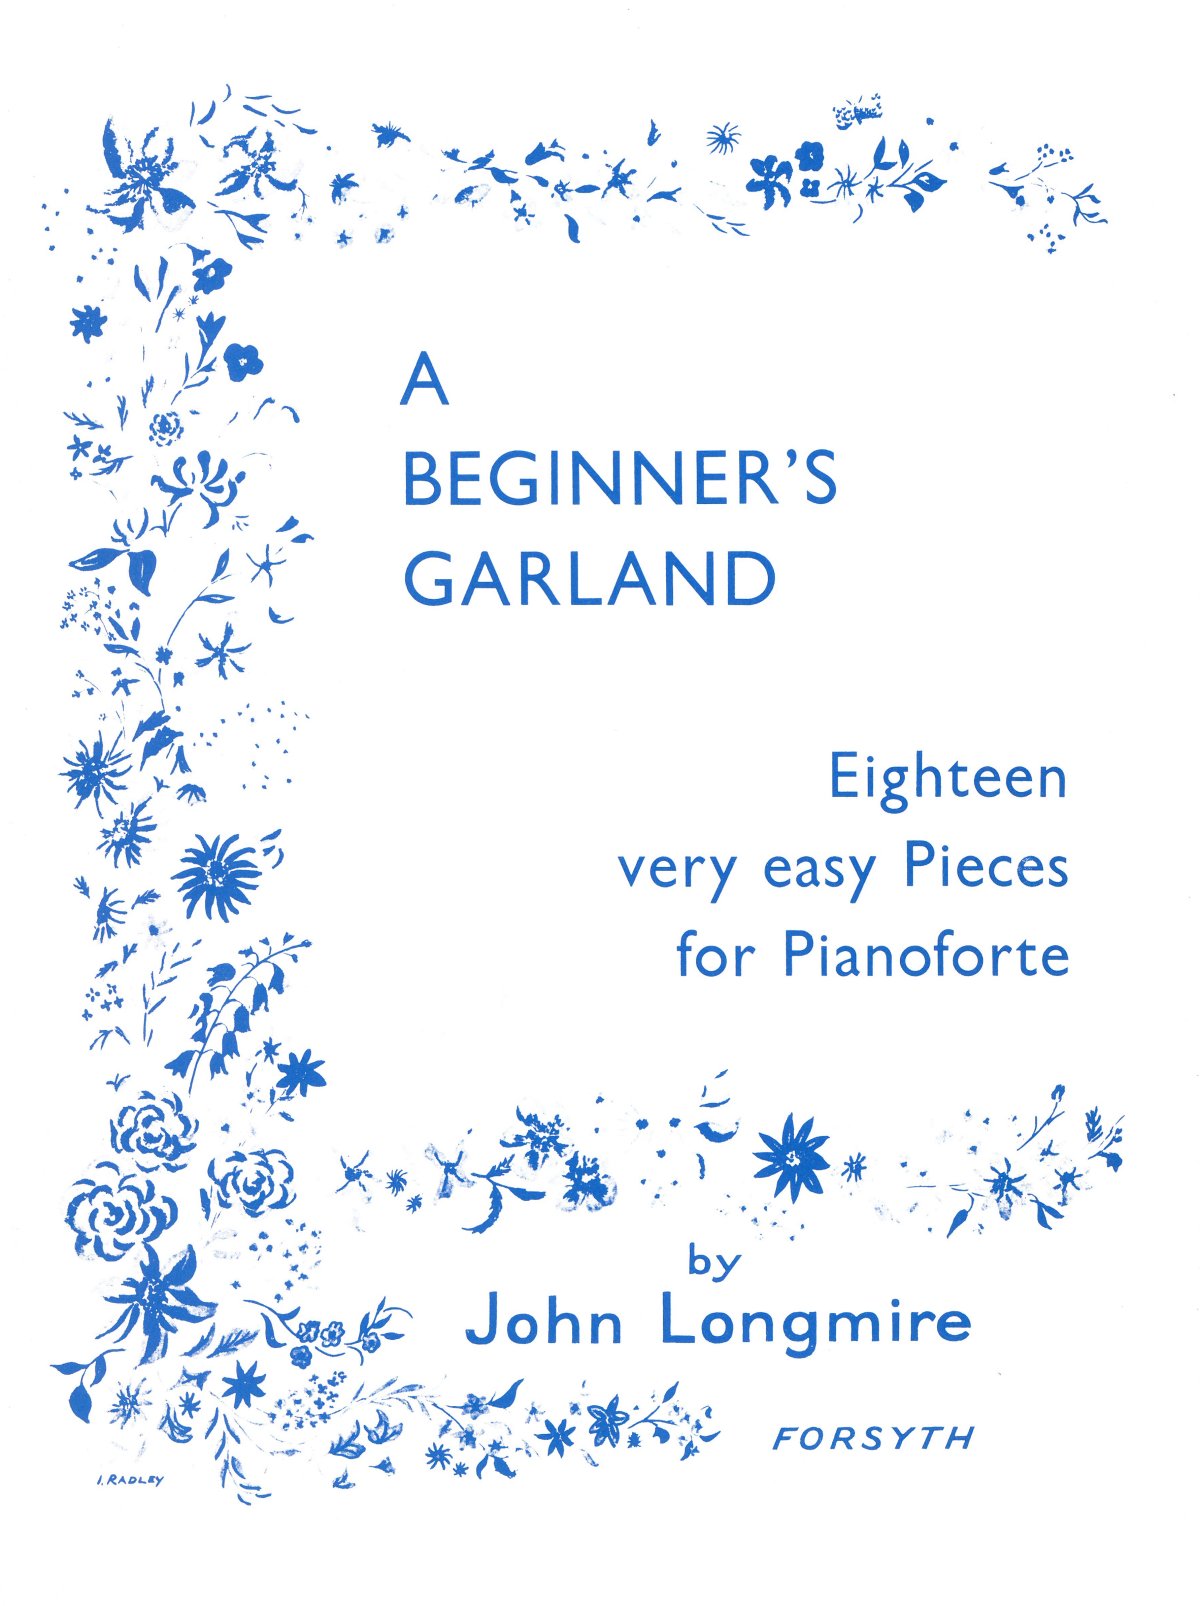 Beginners Garland 18 Very Easy Pieces Piano Sheet Music Songbook